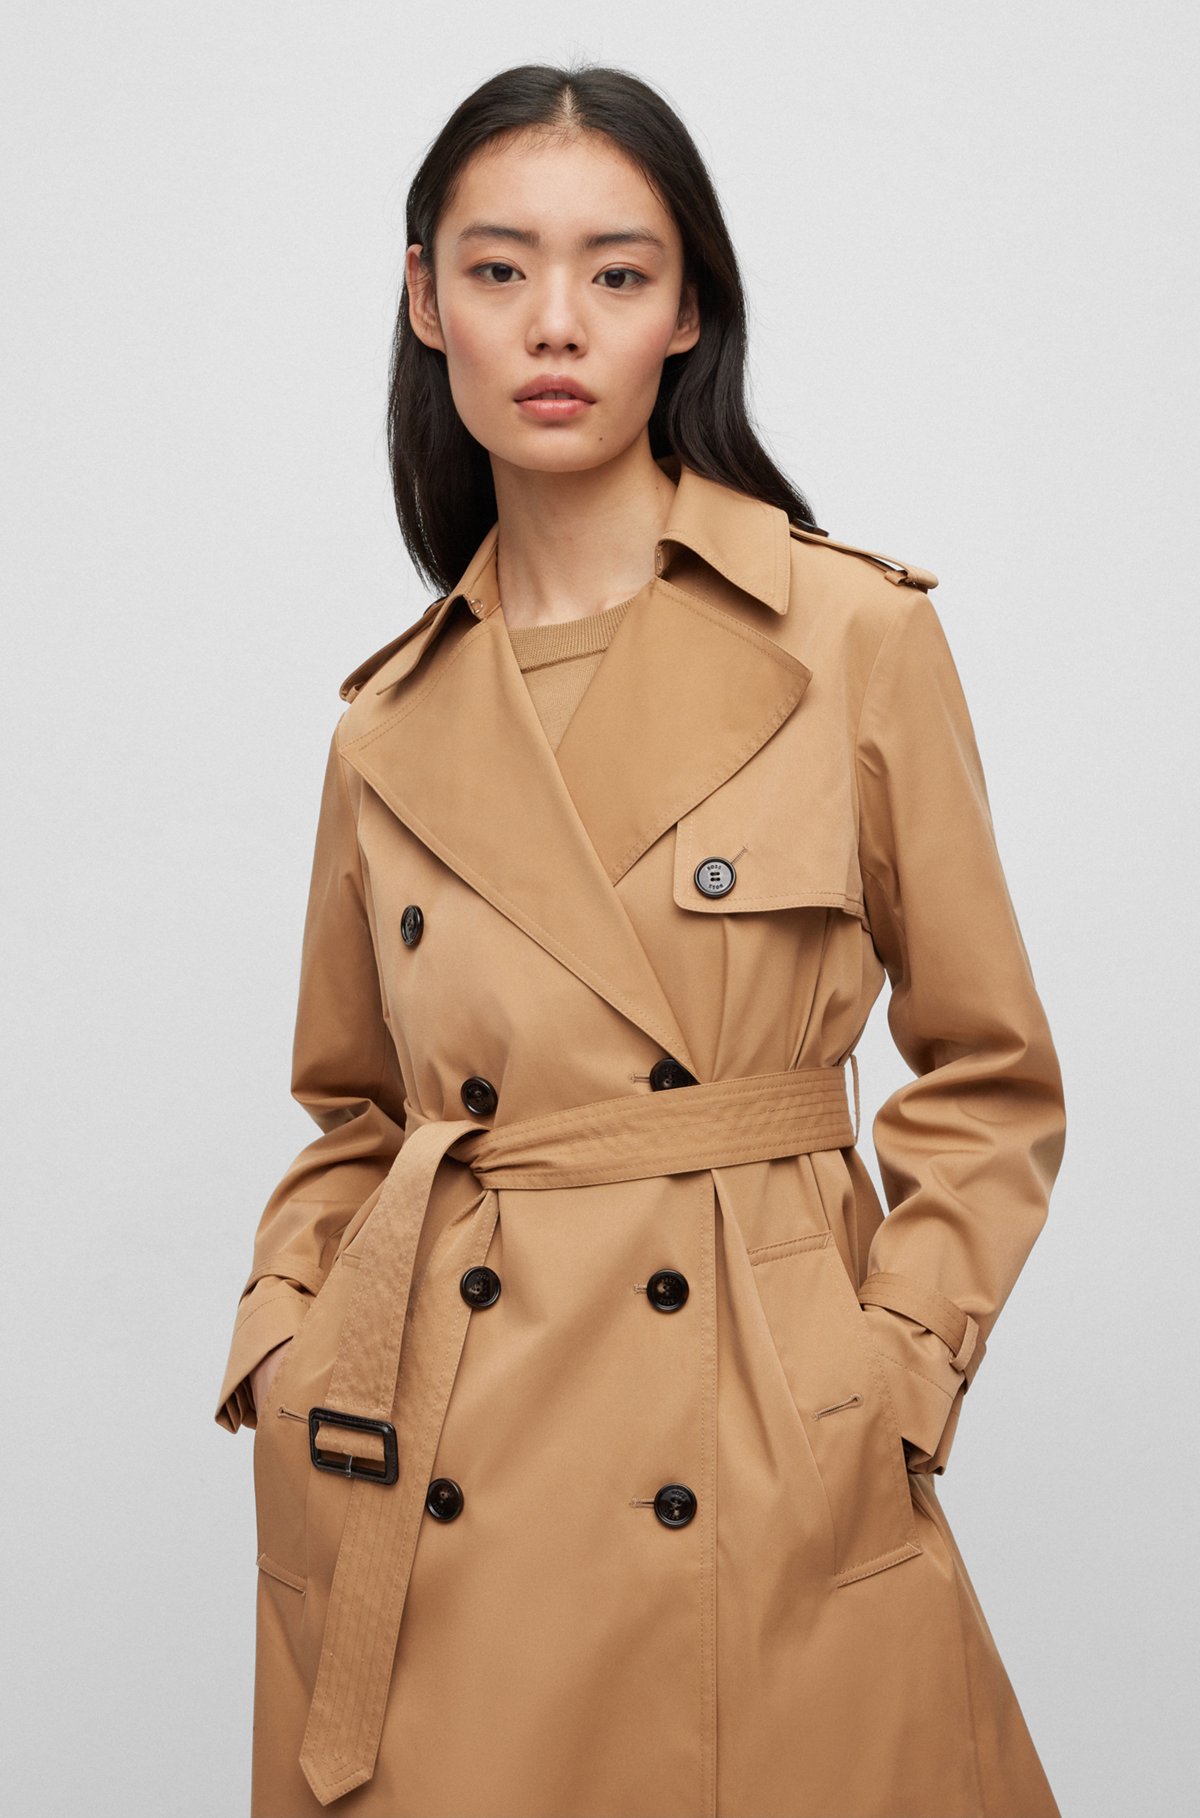 BOSS - Double-breasted trench coat with belted closure